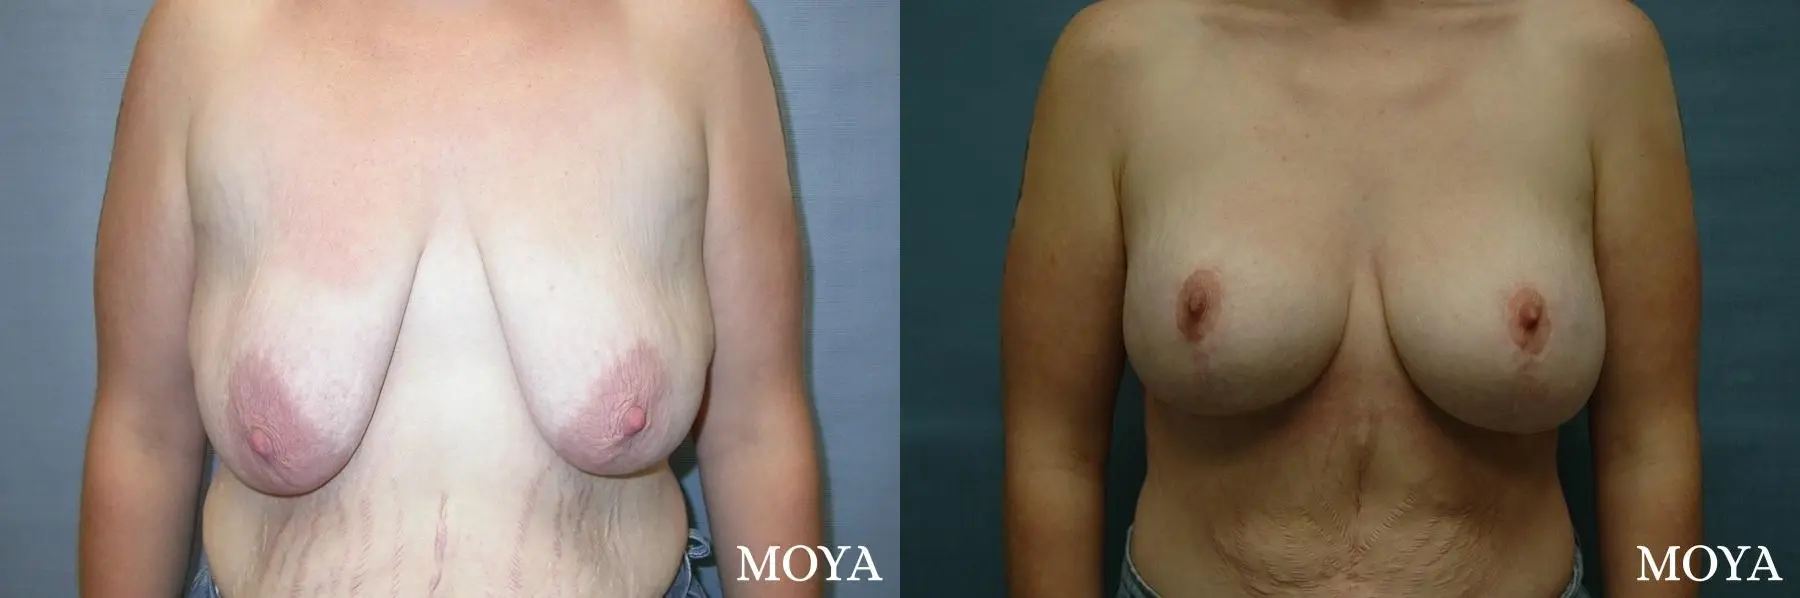 Breast Augmentation With Lift: Patient 5 - Before and After 1